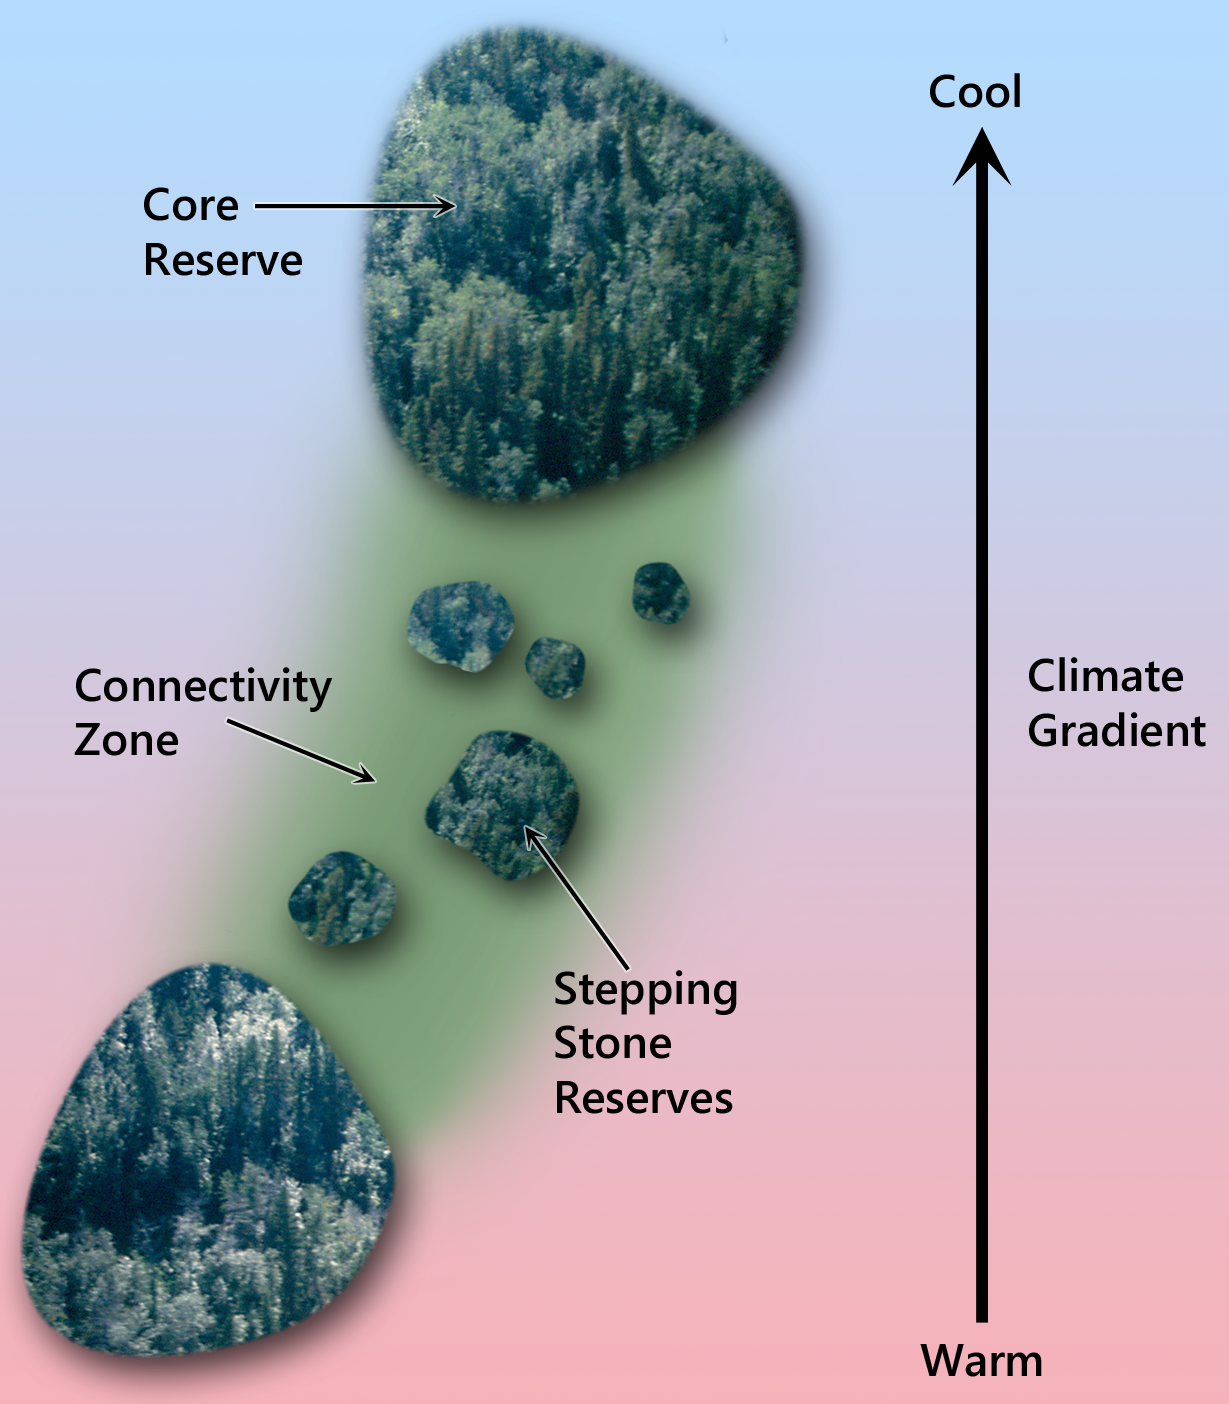 Stepping stone protected areas for climate connectivity